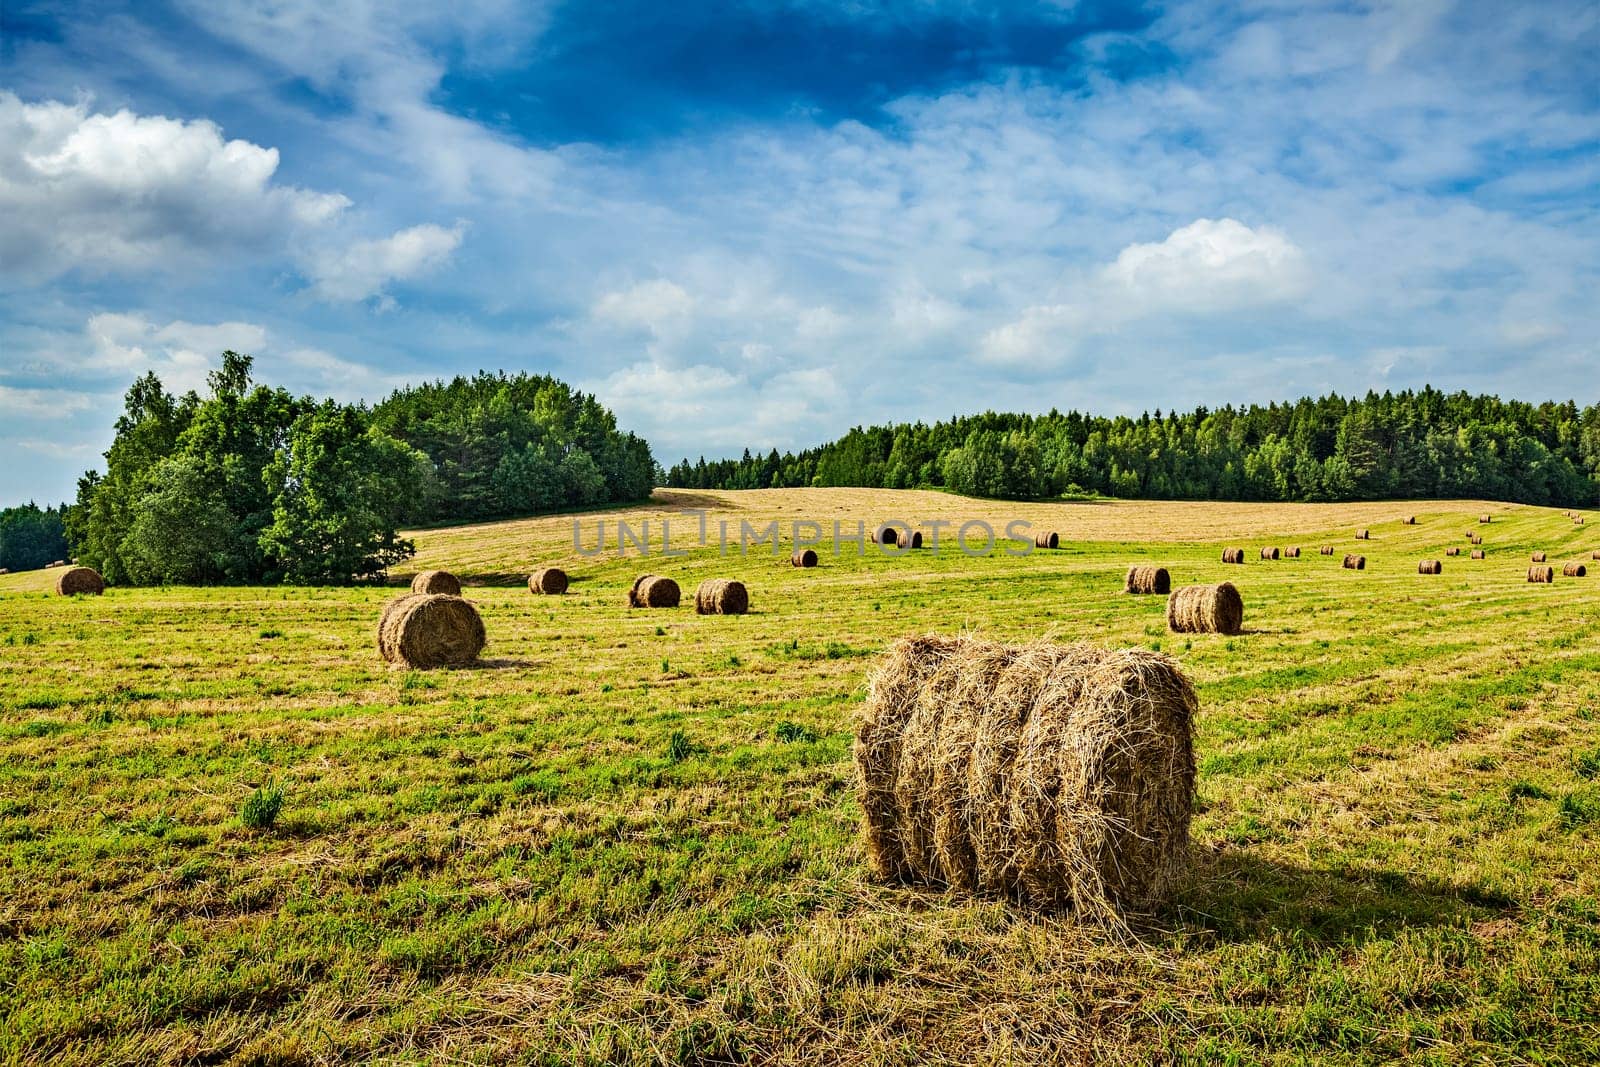 Agriculture background - Hay bales on field in summer